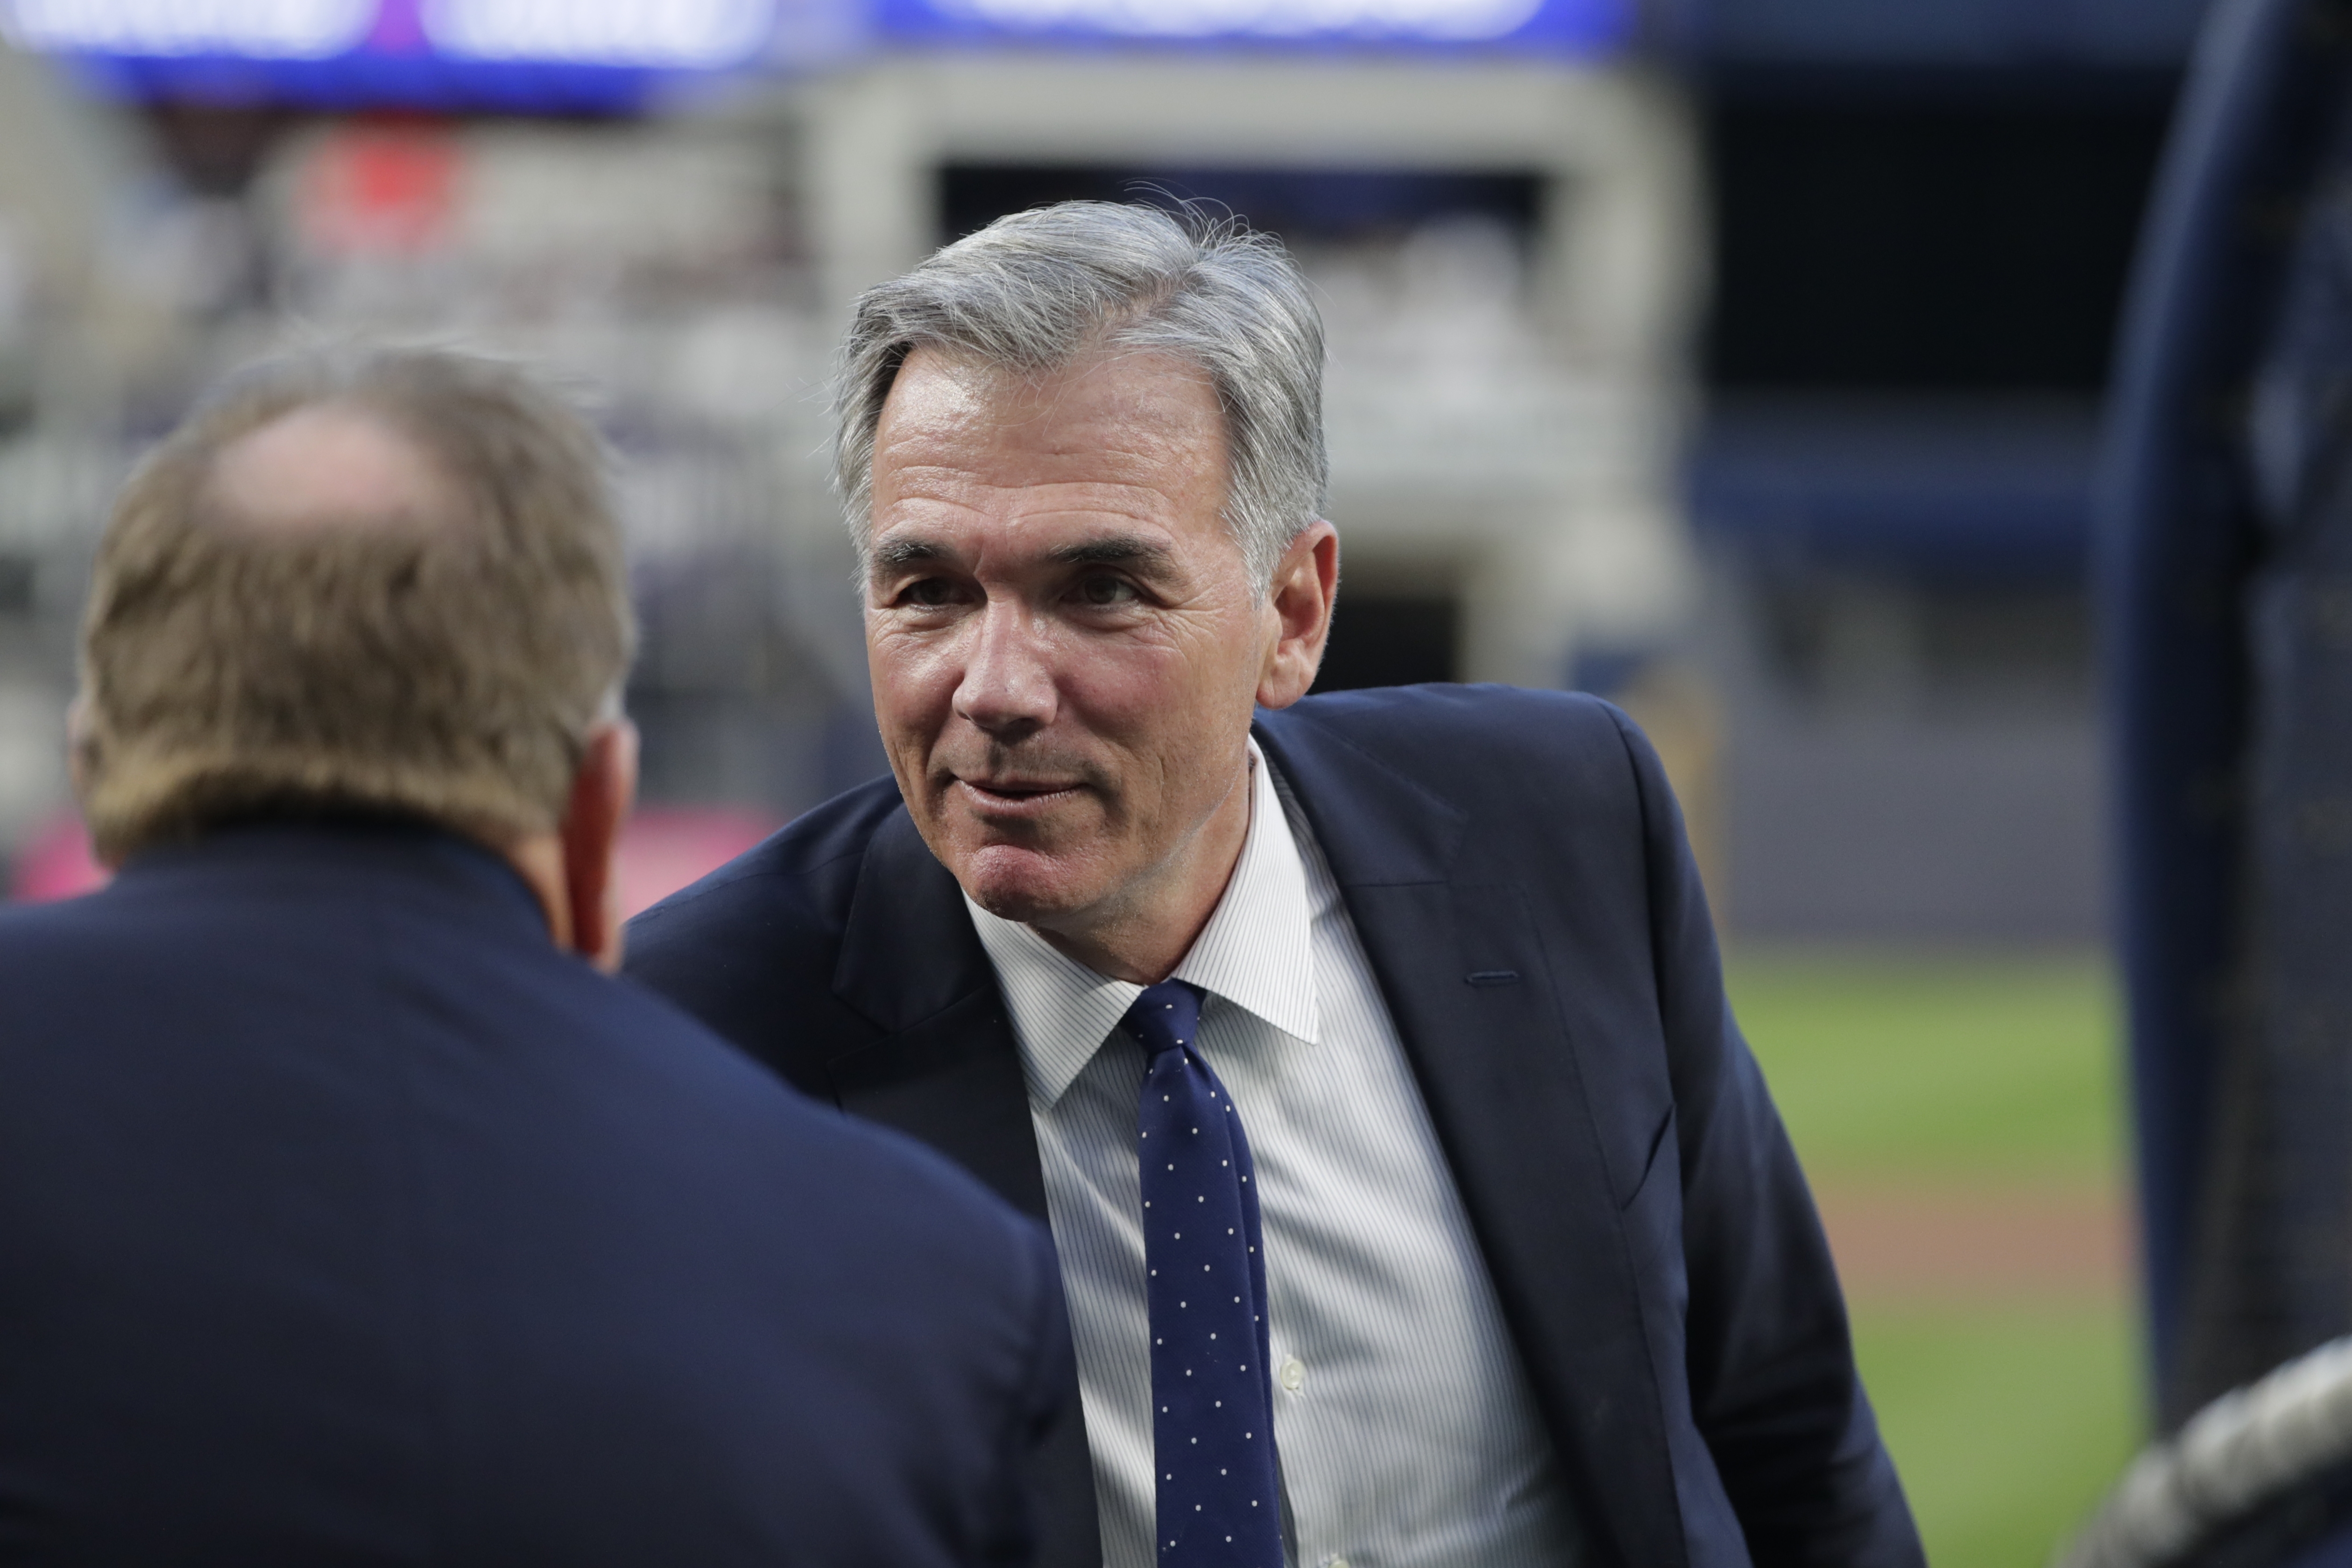 Billy Beane named Executive of the Year - NBC Sports